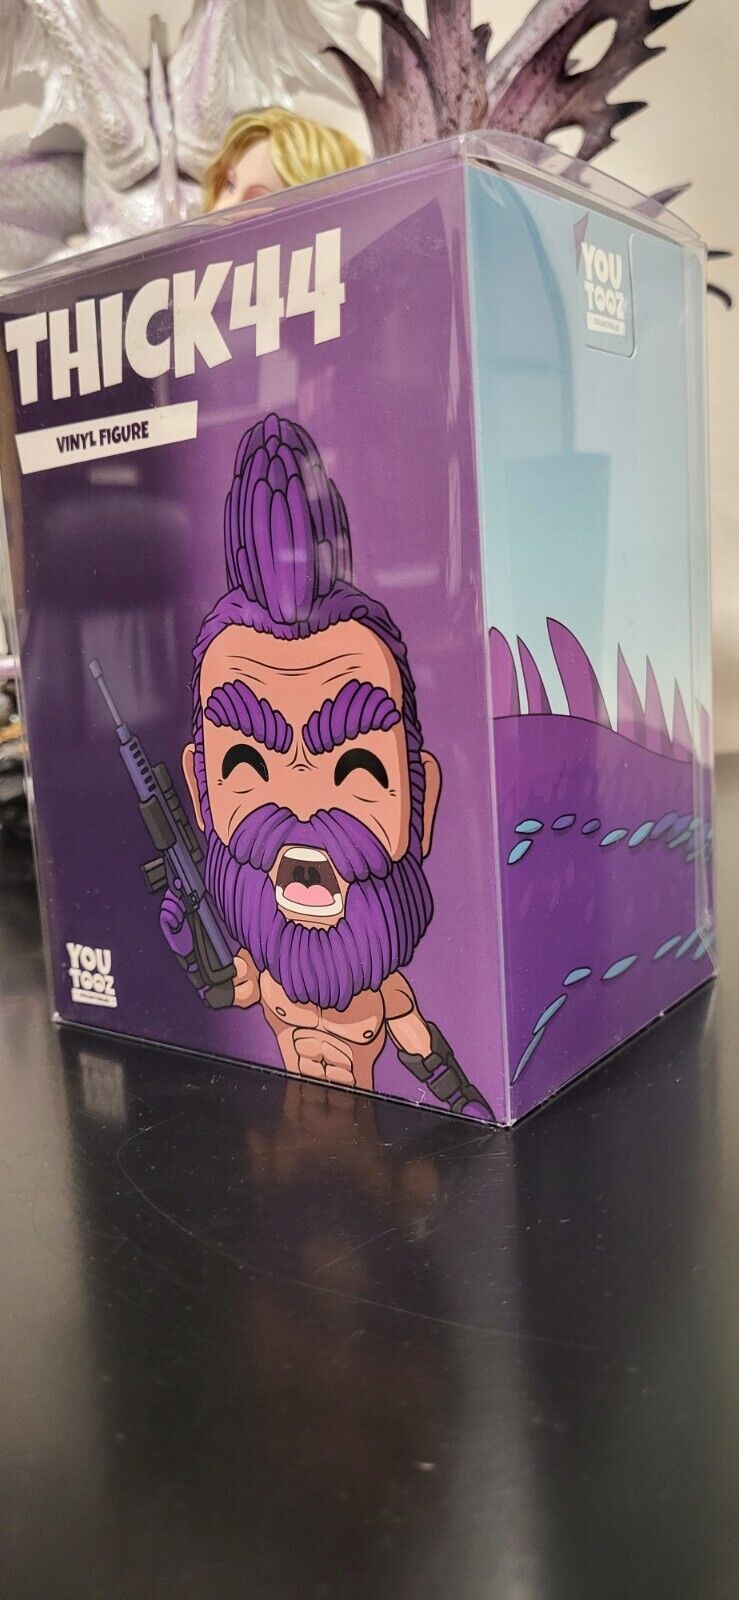 Thick 44 Neebs Gaming youtooz vinyl figure Limited Edition in unopened pack.